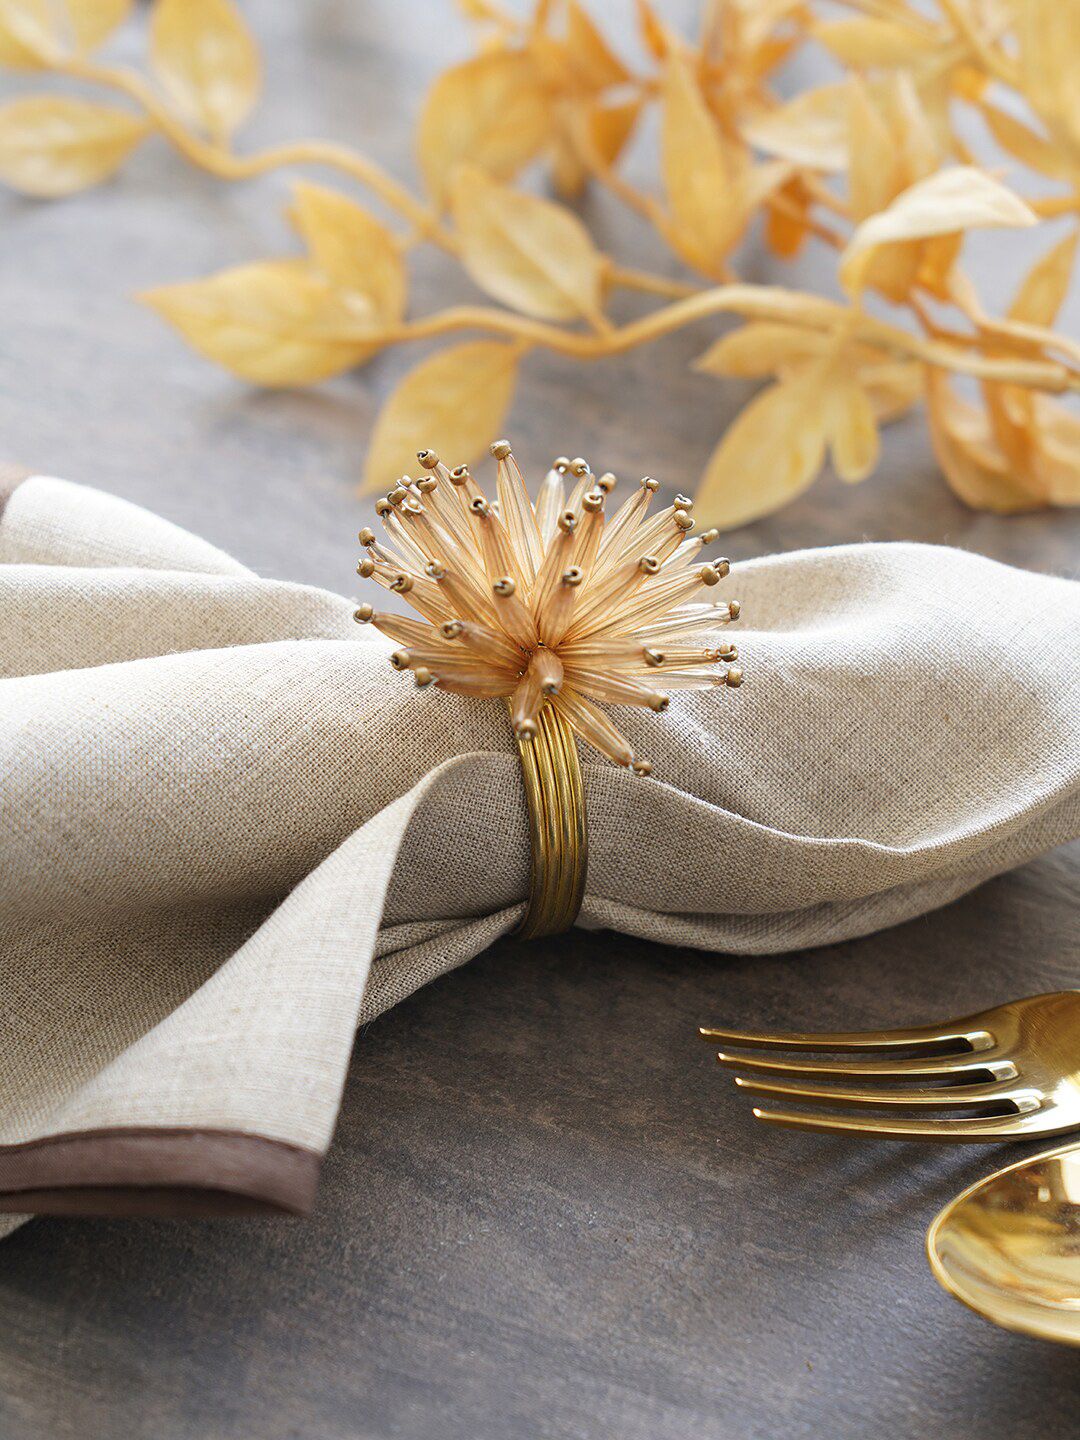 Pure Home and Living Set of 4 Gold-Toned Solid Table Napkins Rings Price in India